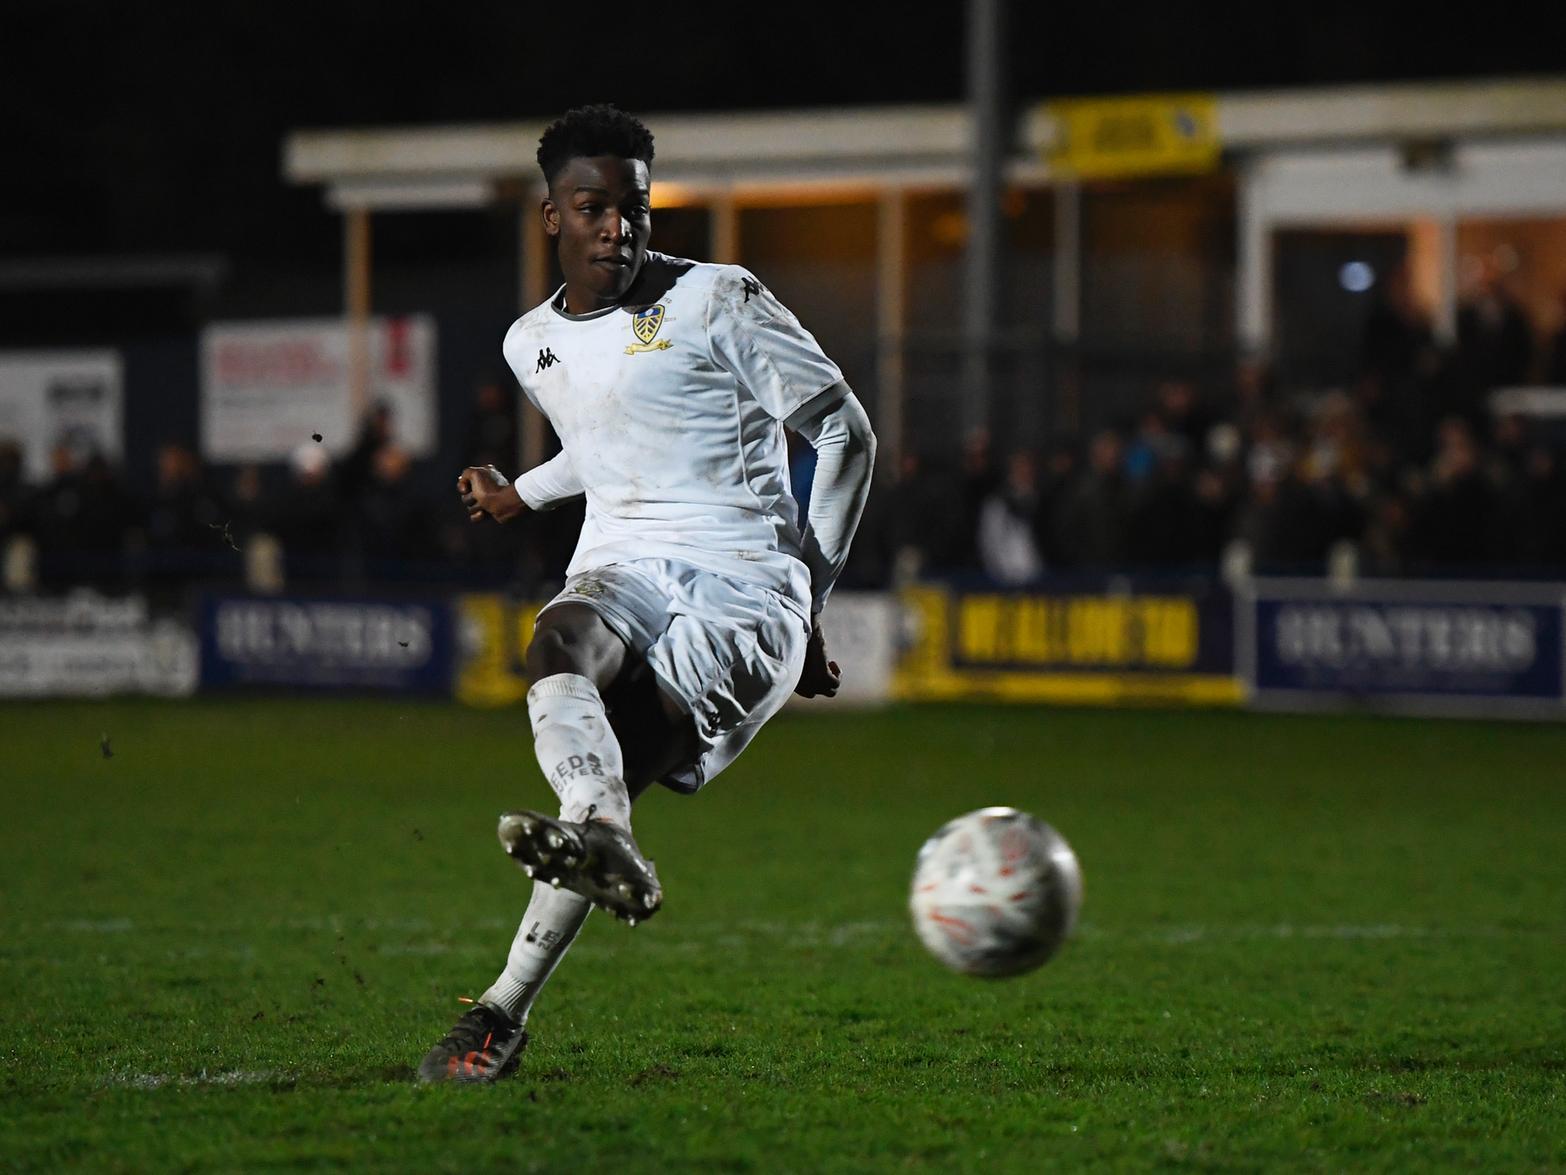 Manchester City and Arsenal have both been linked with a move for Leeds United starlet Henri Kumwenda, who is said to have "blown away" scouts with his performances at youth level. (The 72)